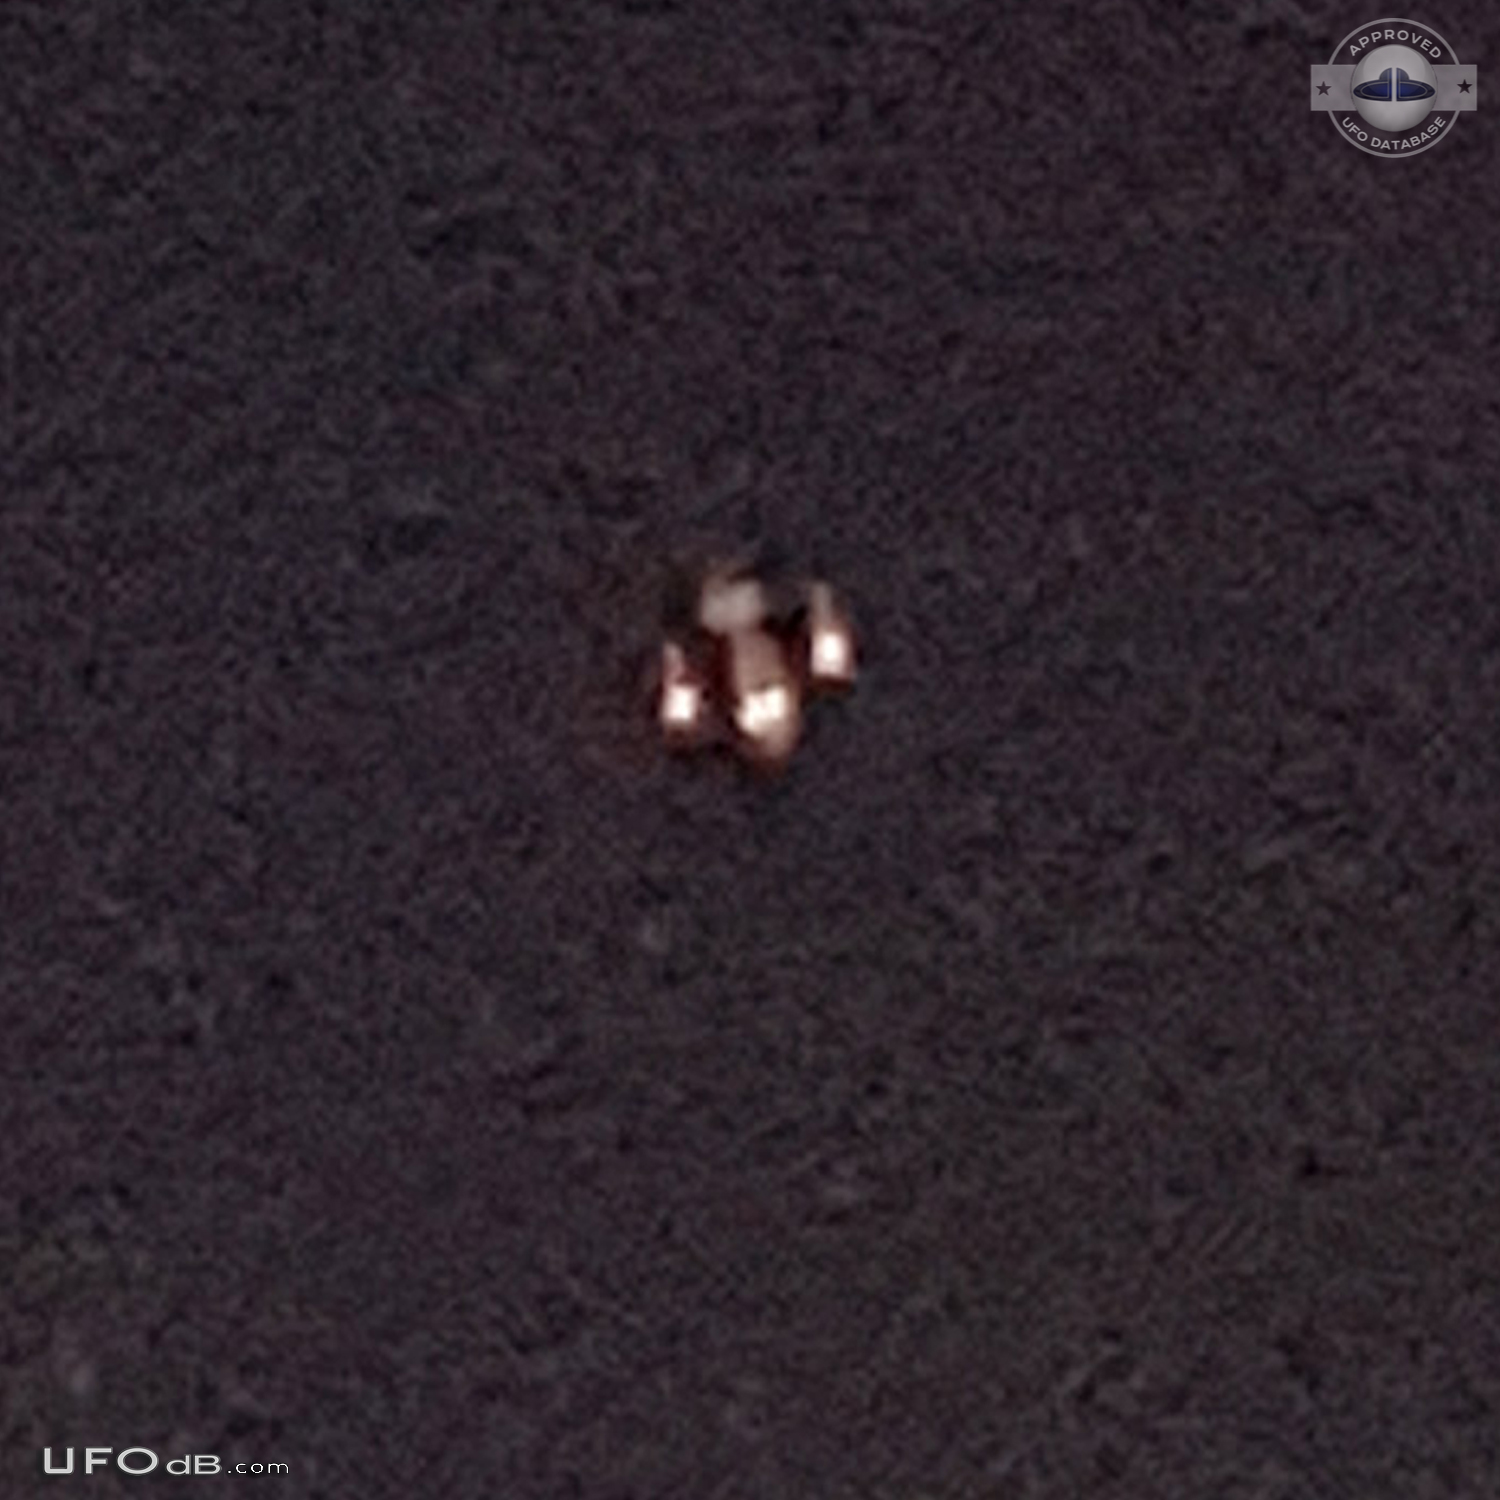 UFO rise very rapidly from the north then sped off very fast Chicago I UFO Picture #831-2